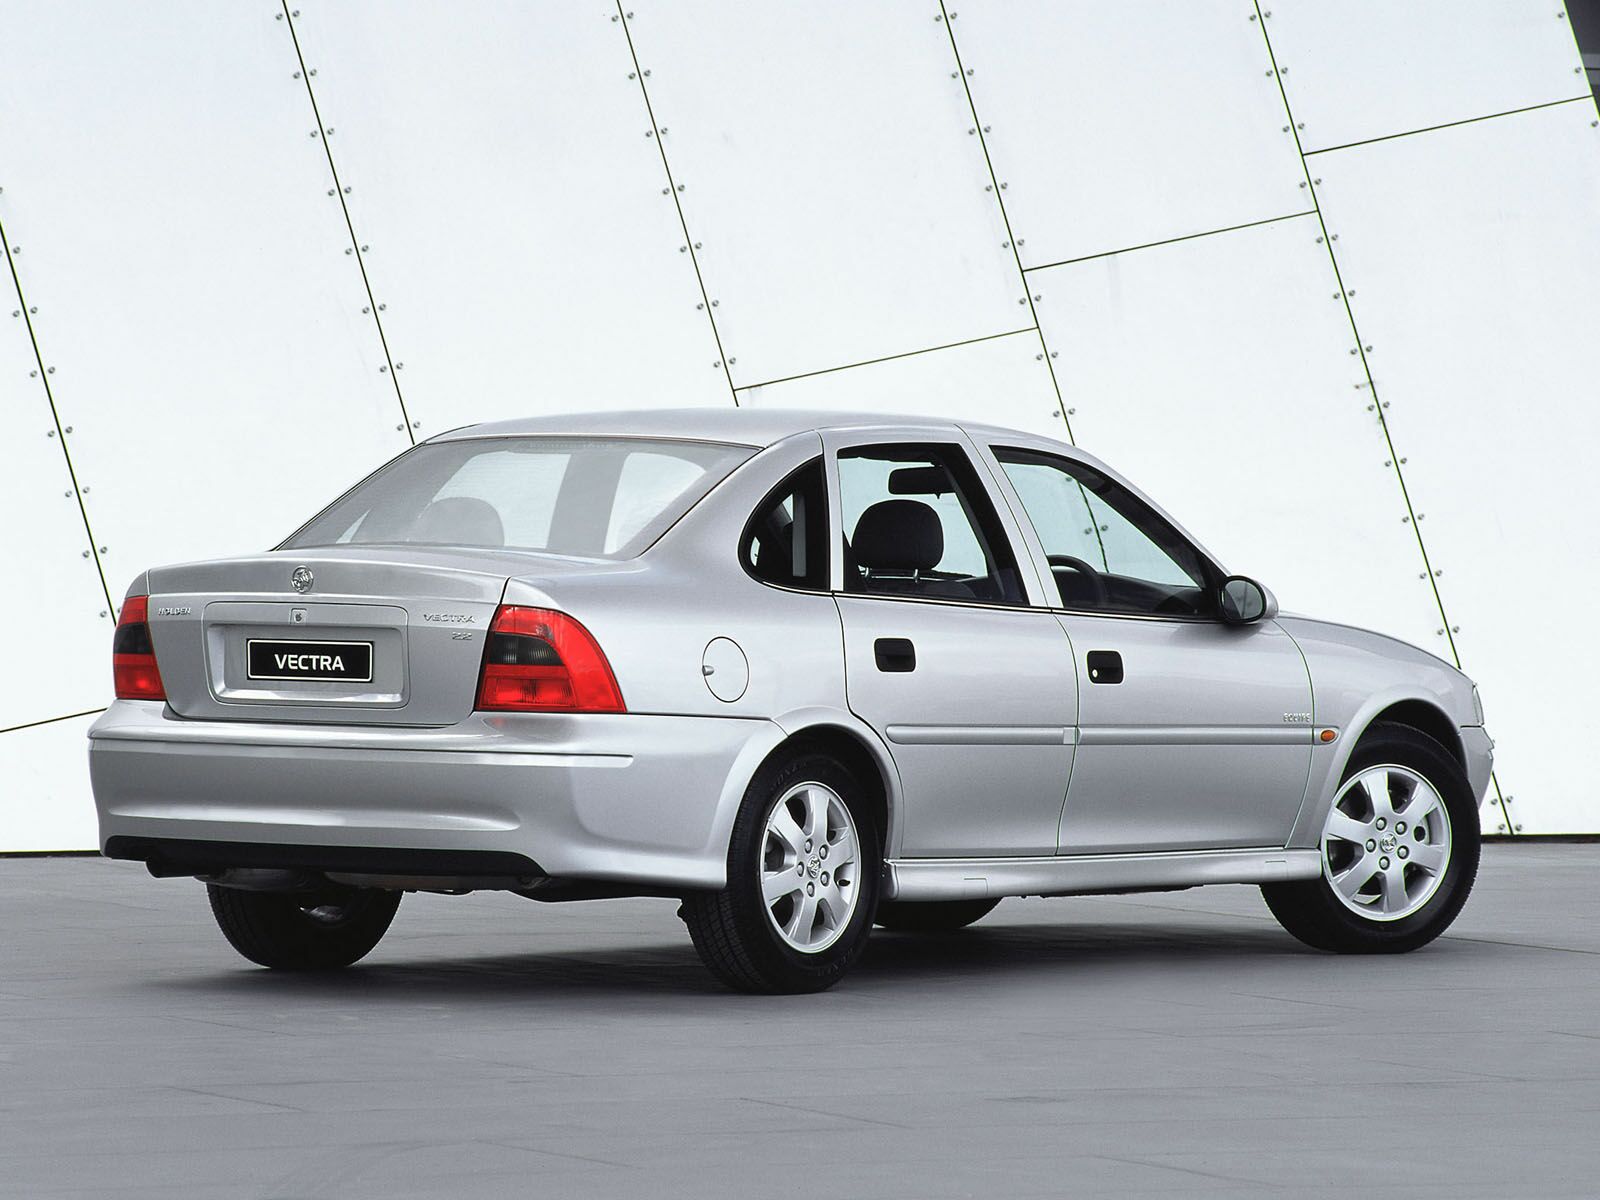 Holden Vectra 32 V6. View Download Wallpaper. 1600x1200. Comments